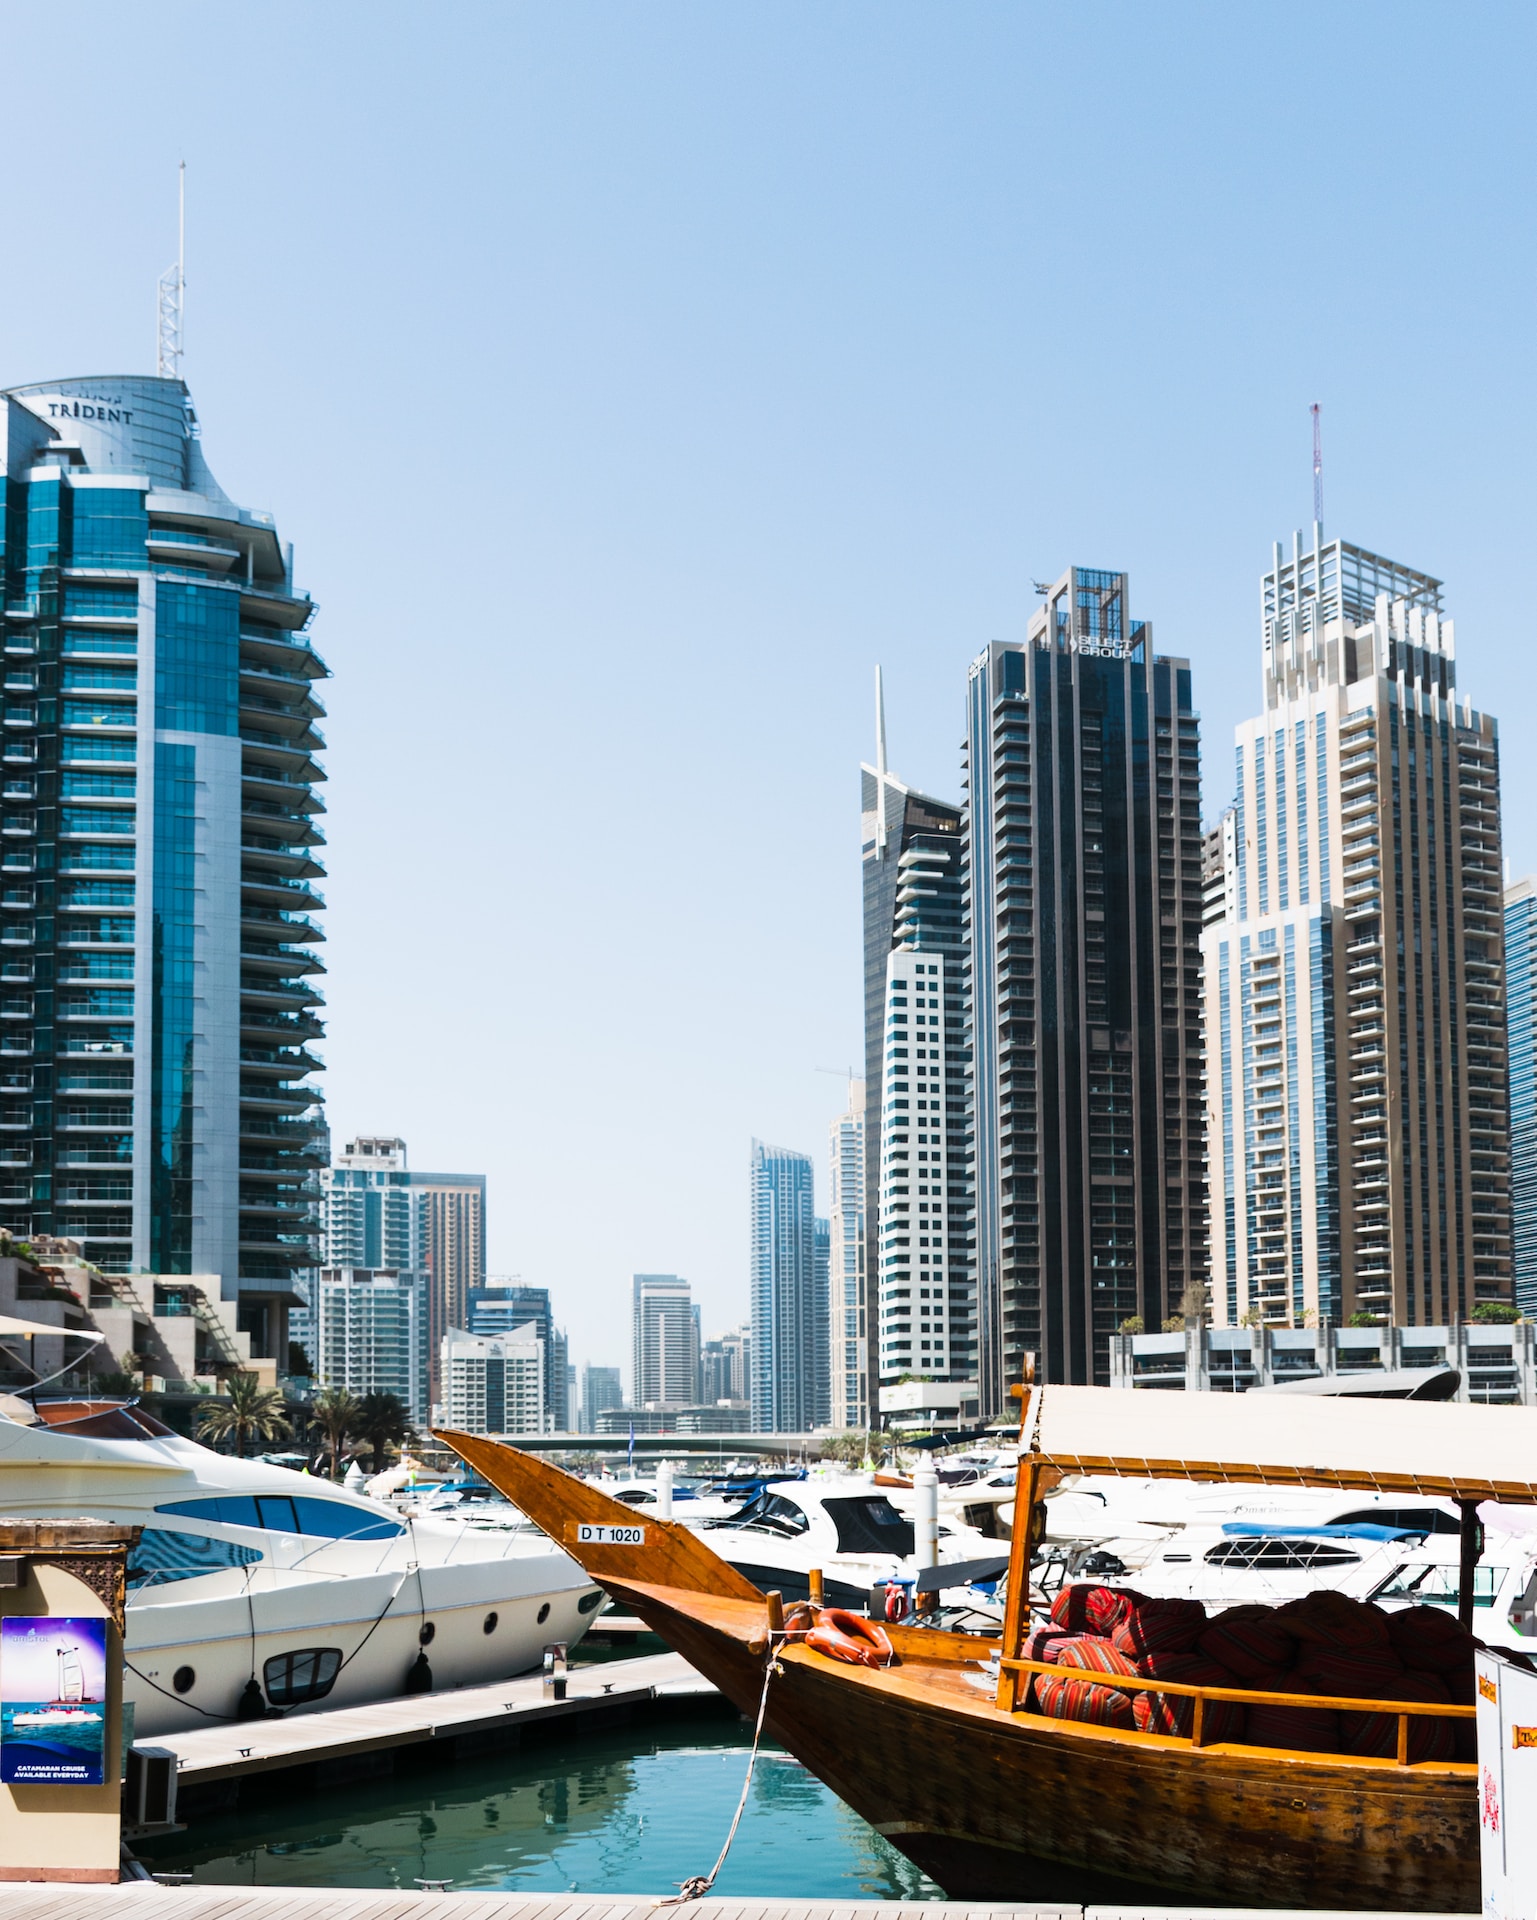 How do I know if a real estate agent is legit in Dubai?